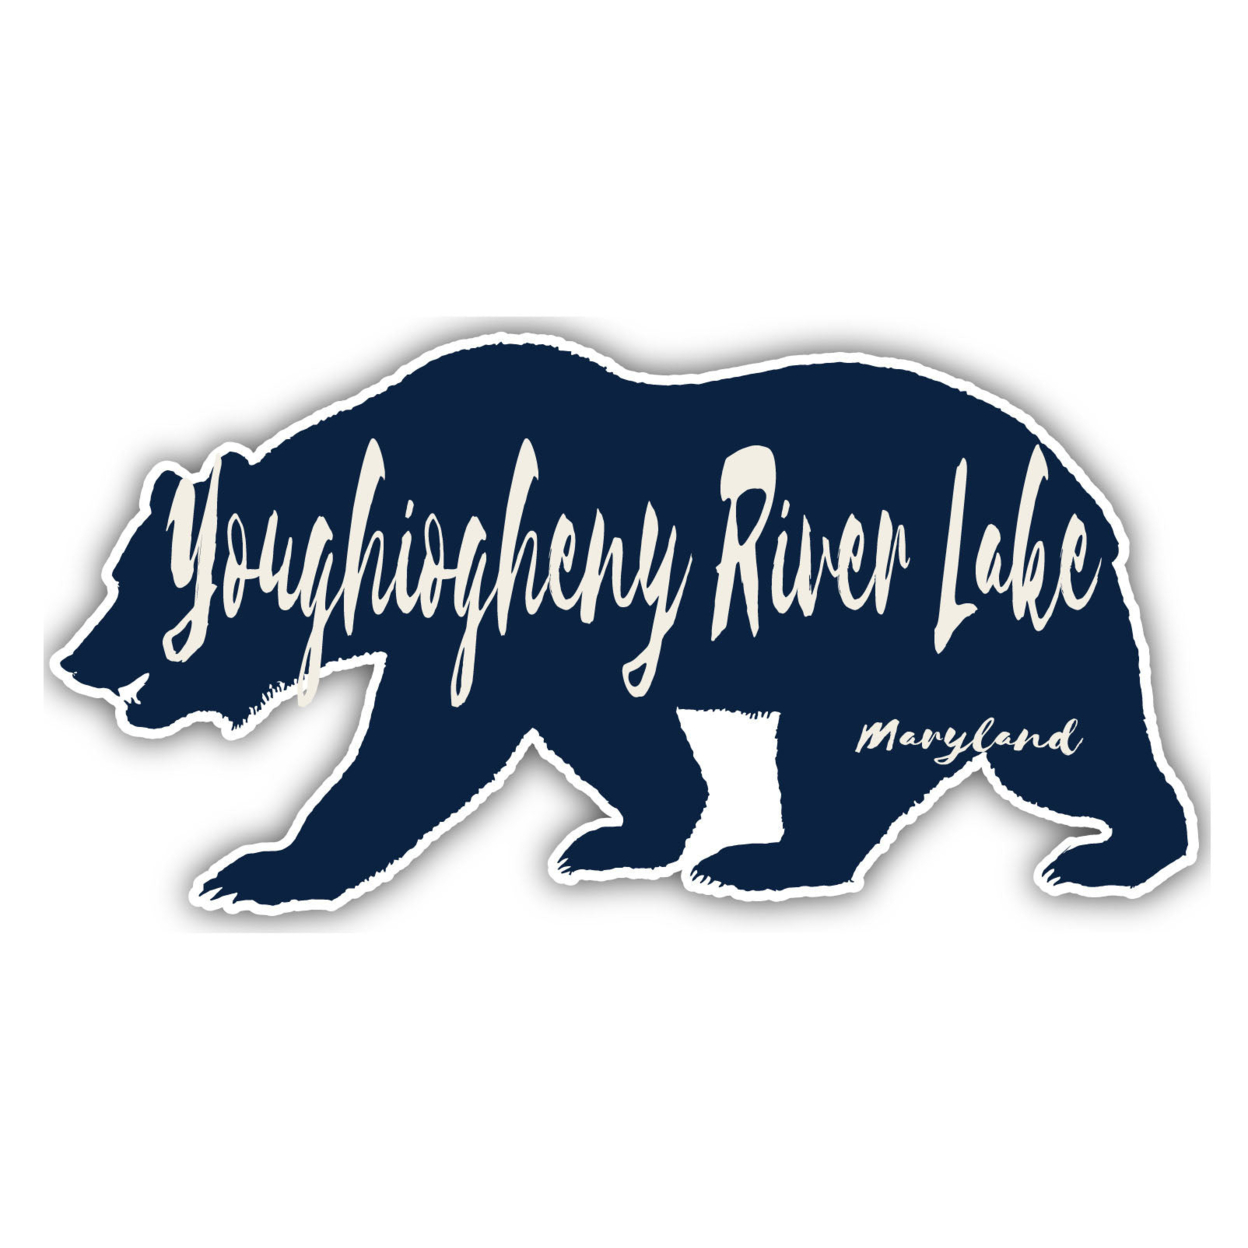 Youghiogheny River Lake Maryland Souvenir Decorative Stickers (Choose Theme And Size) - Single Unit, 4-Inch, Bear